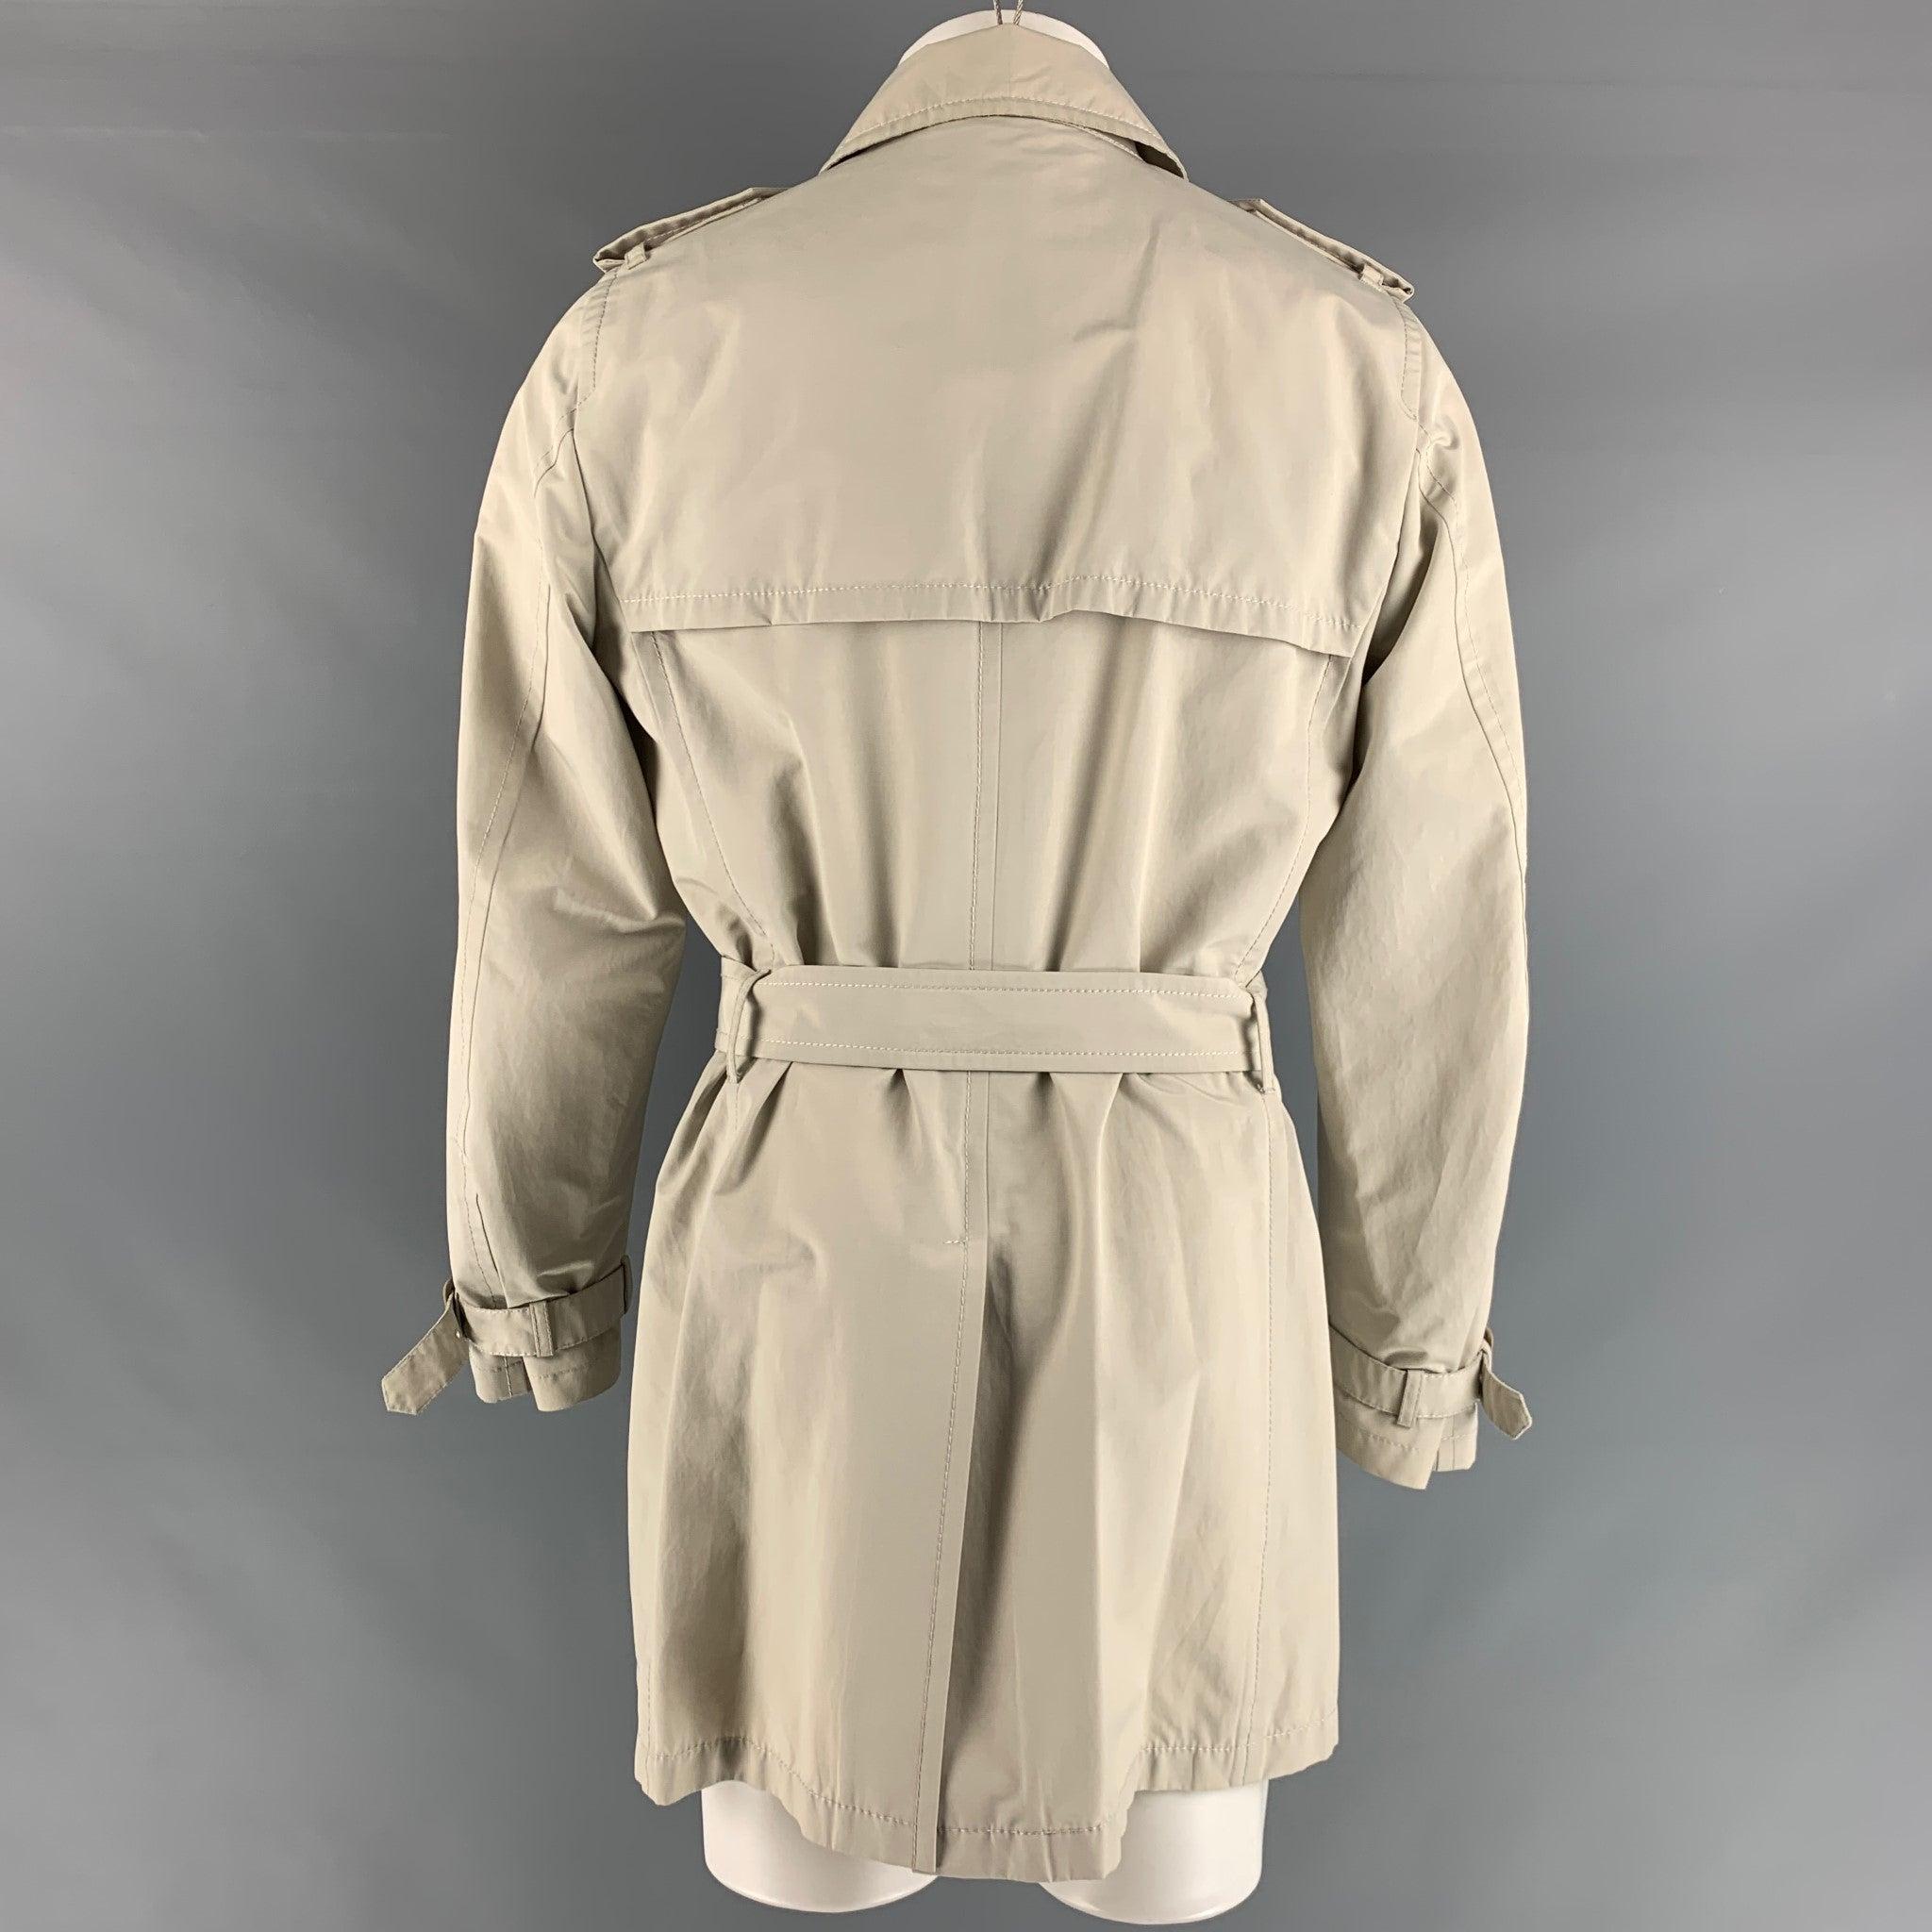 PRADA Size 38 Ivory Solid Cotton Polyester Trench Coat In Good Condition For Sale In San Francisco, CA